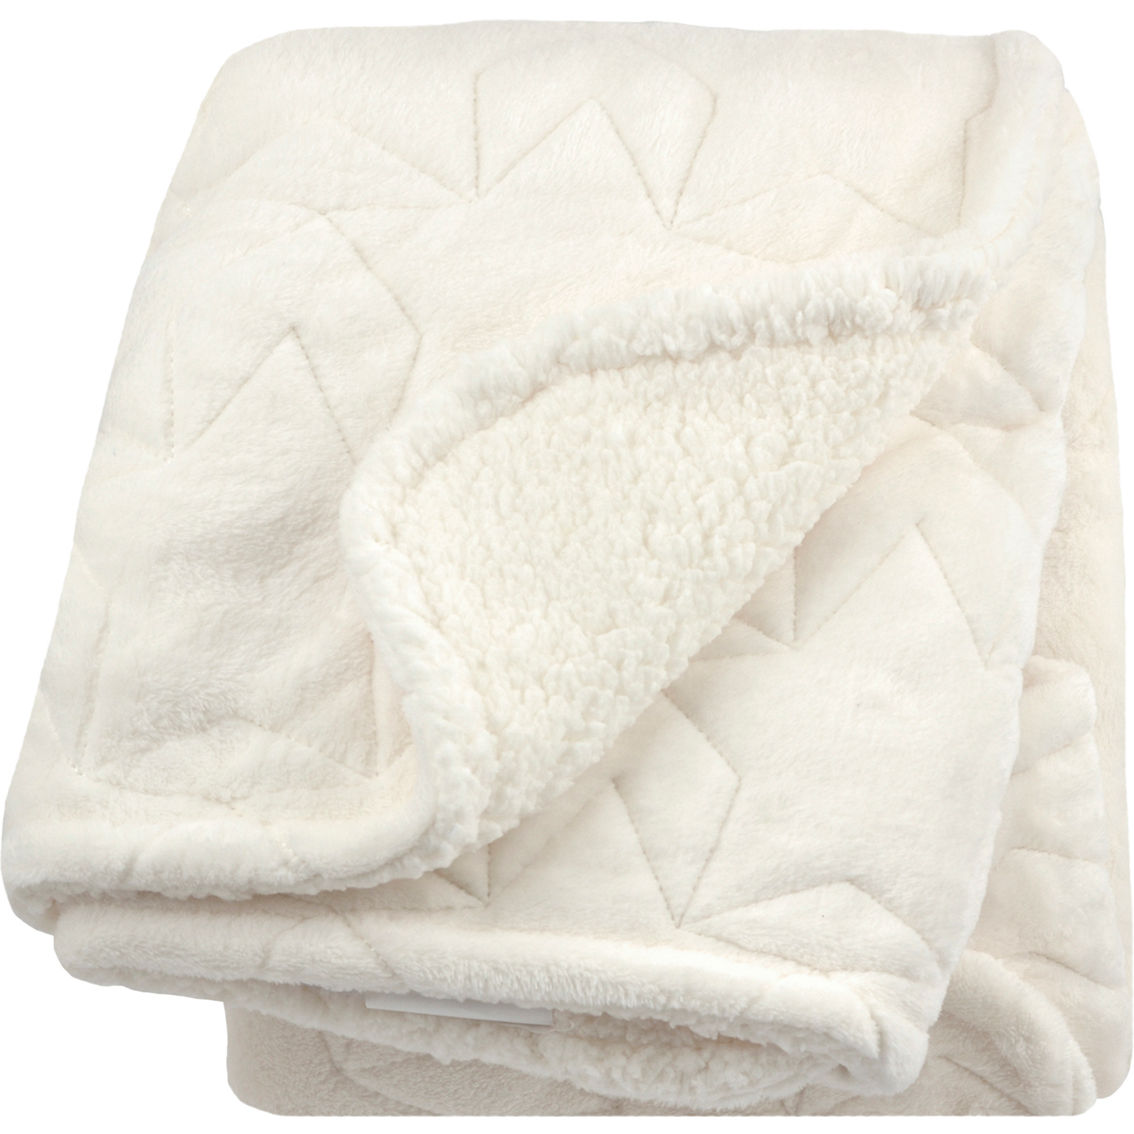 Gerber Just Born Ivory Star Two-Ply Stitched Blanket - Image 2 of 2